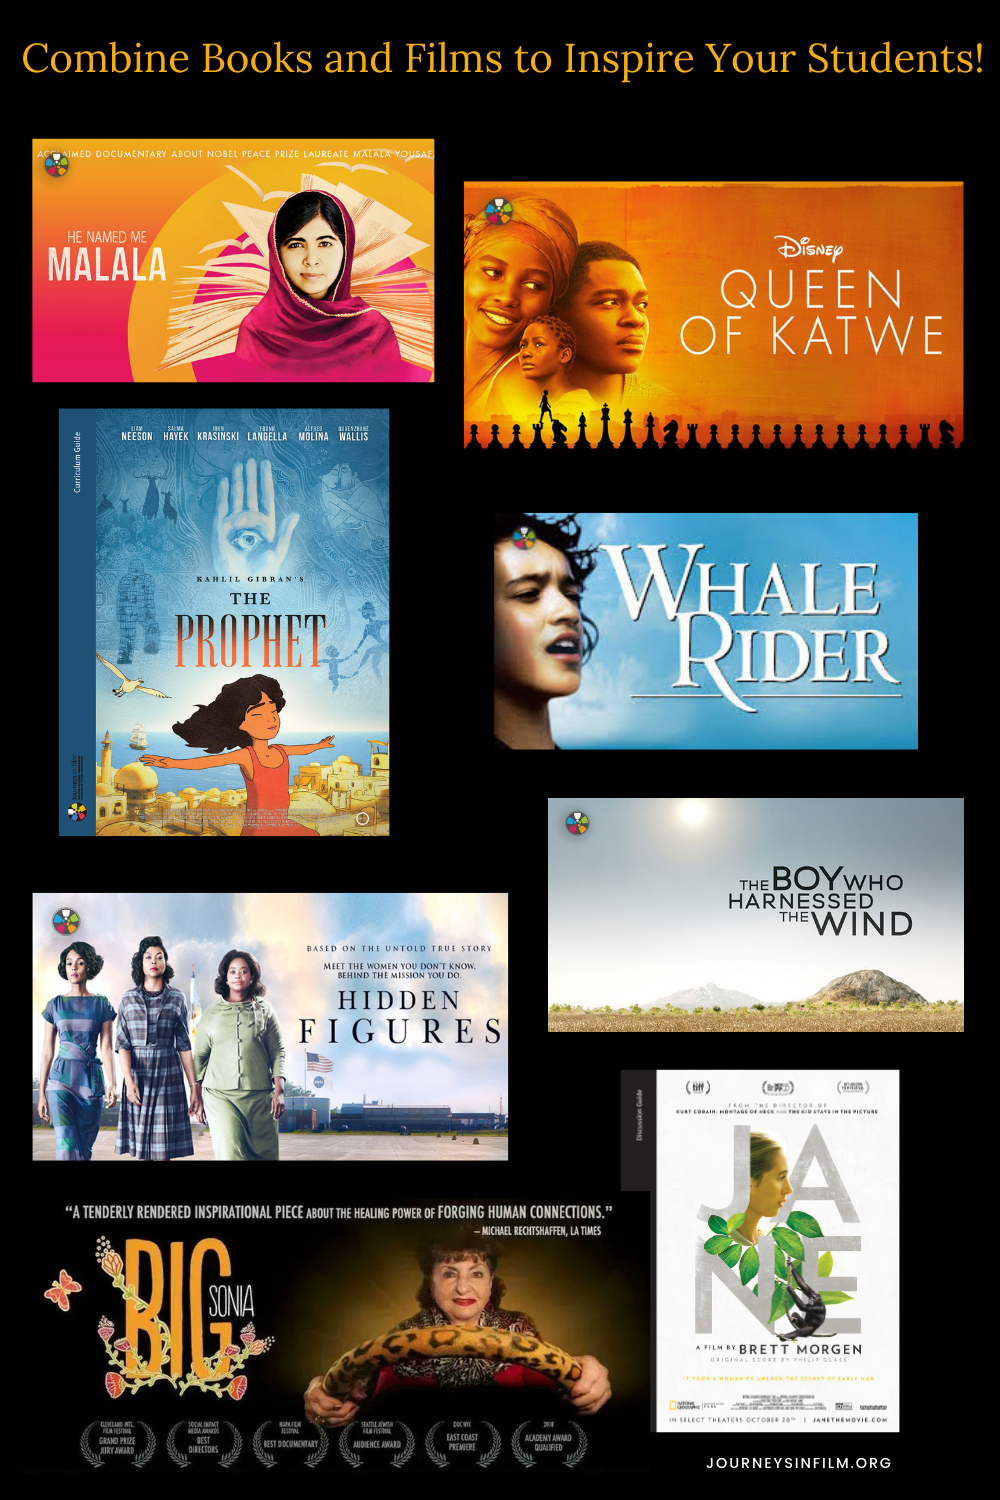 Text across the top reads: Combine books and films to inspire students. Below the text are film posters for He Named Me Malala, Queen of Katwe, The Prophet, Whale Rider, Hidden Figures, The Boy Who Harnessed the Wind, Jane and Big Sonia. 